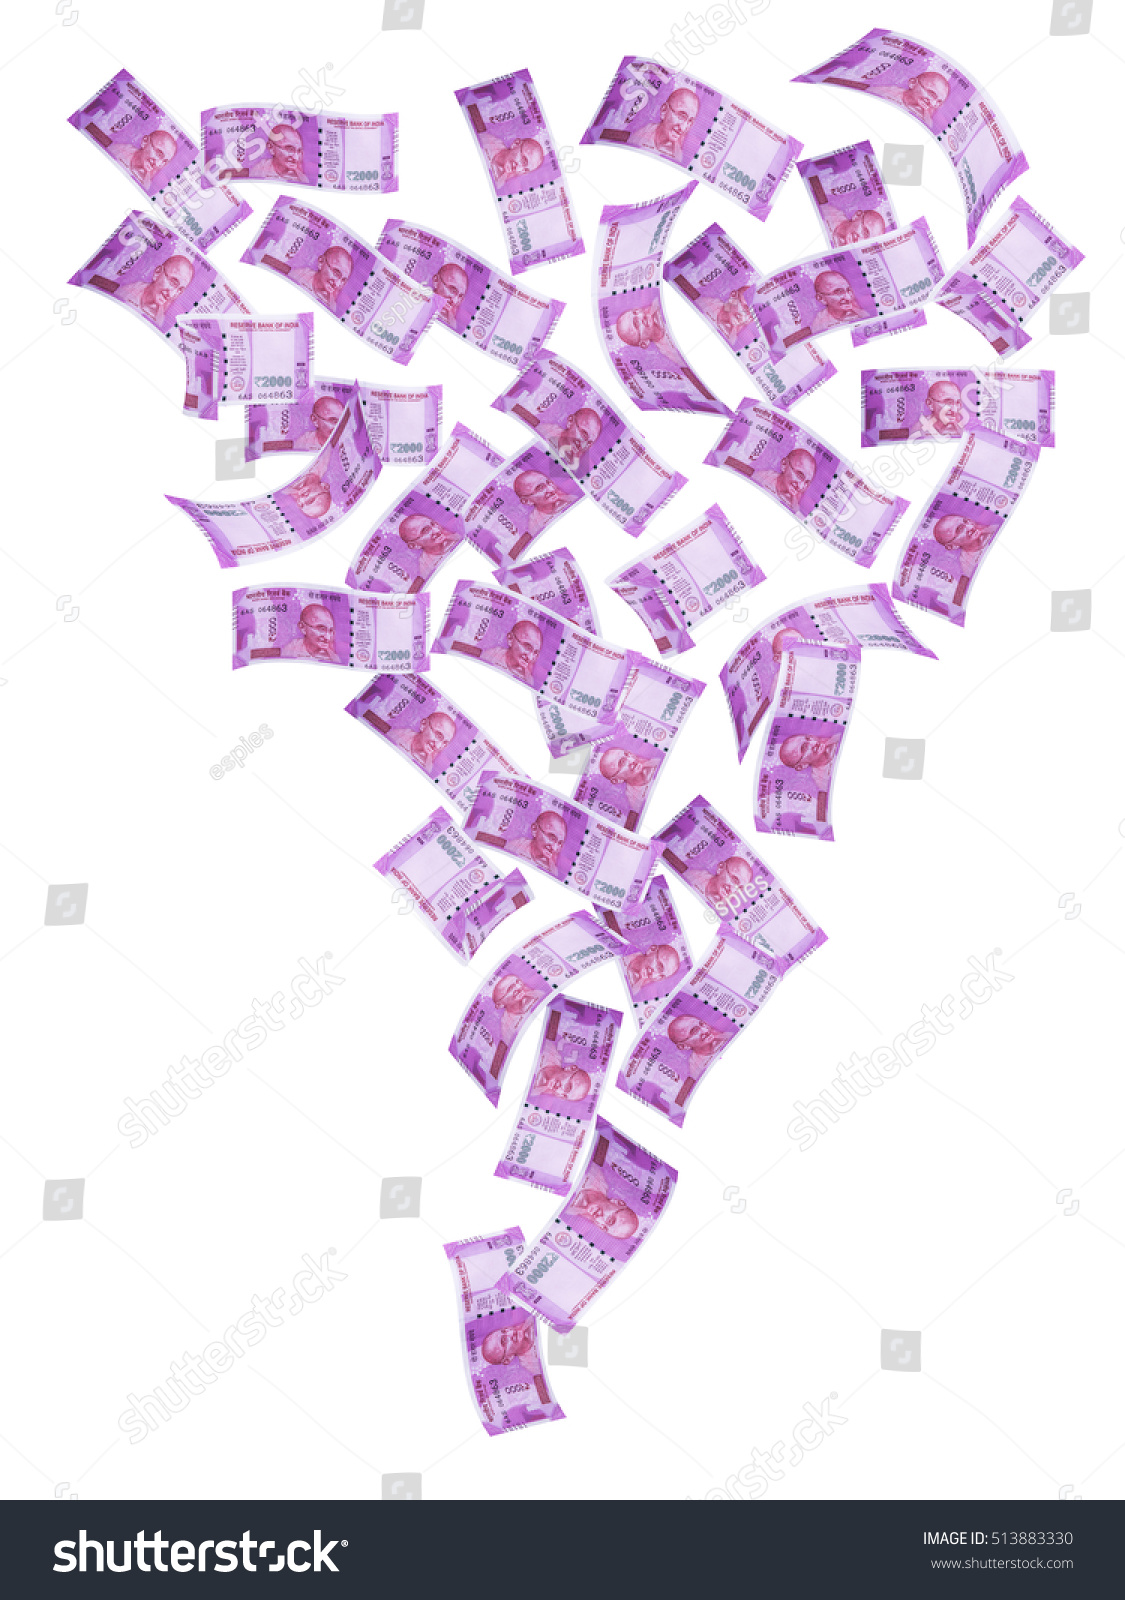 New Indian Currency Notes Of Rupees Stock Photo 513883330 - 